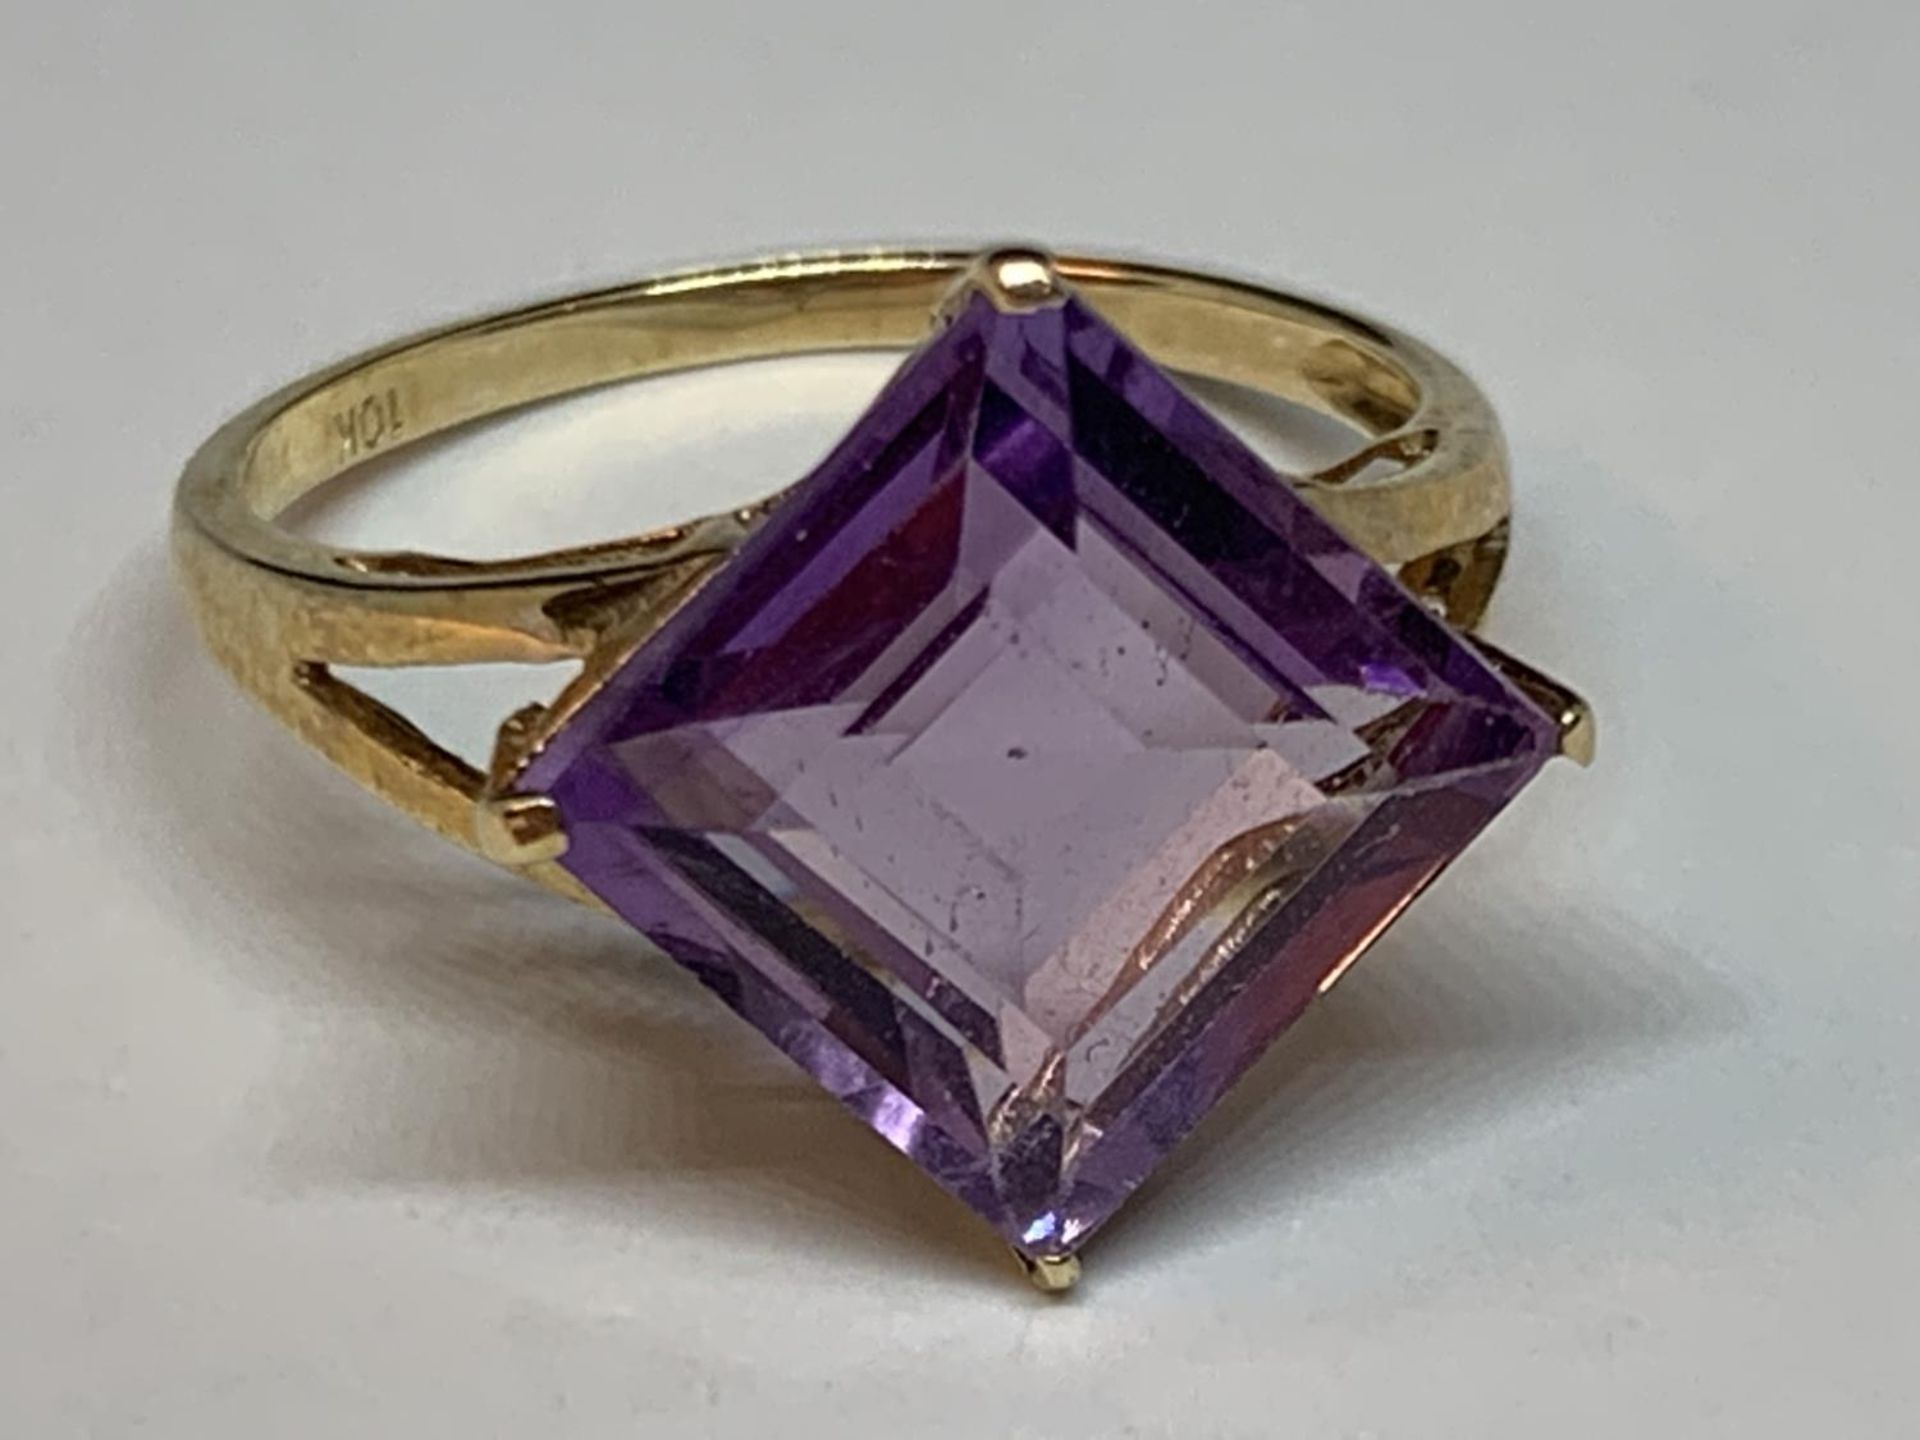 A 10 CARAT GOLD RING WITH A PURPLE DIAMOND SHAPED STONE SIZE O